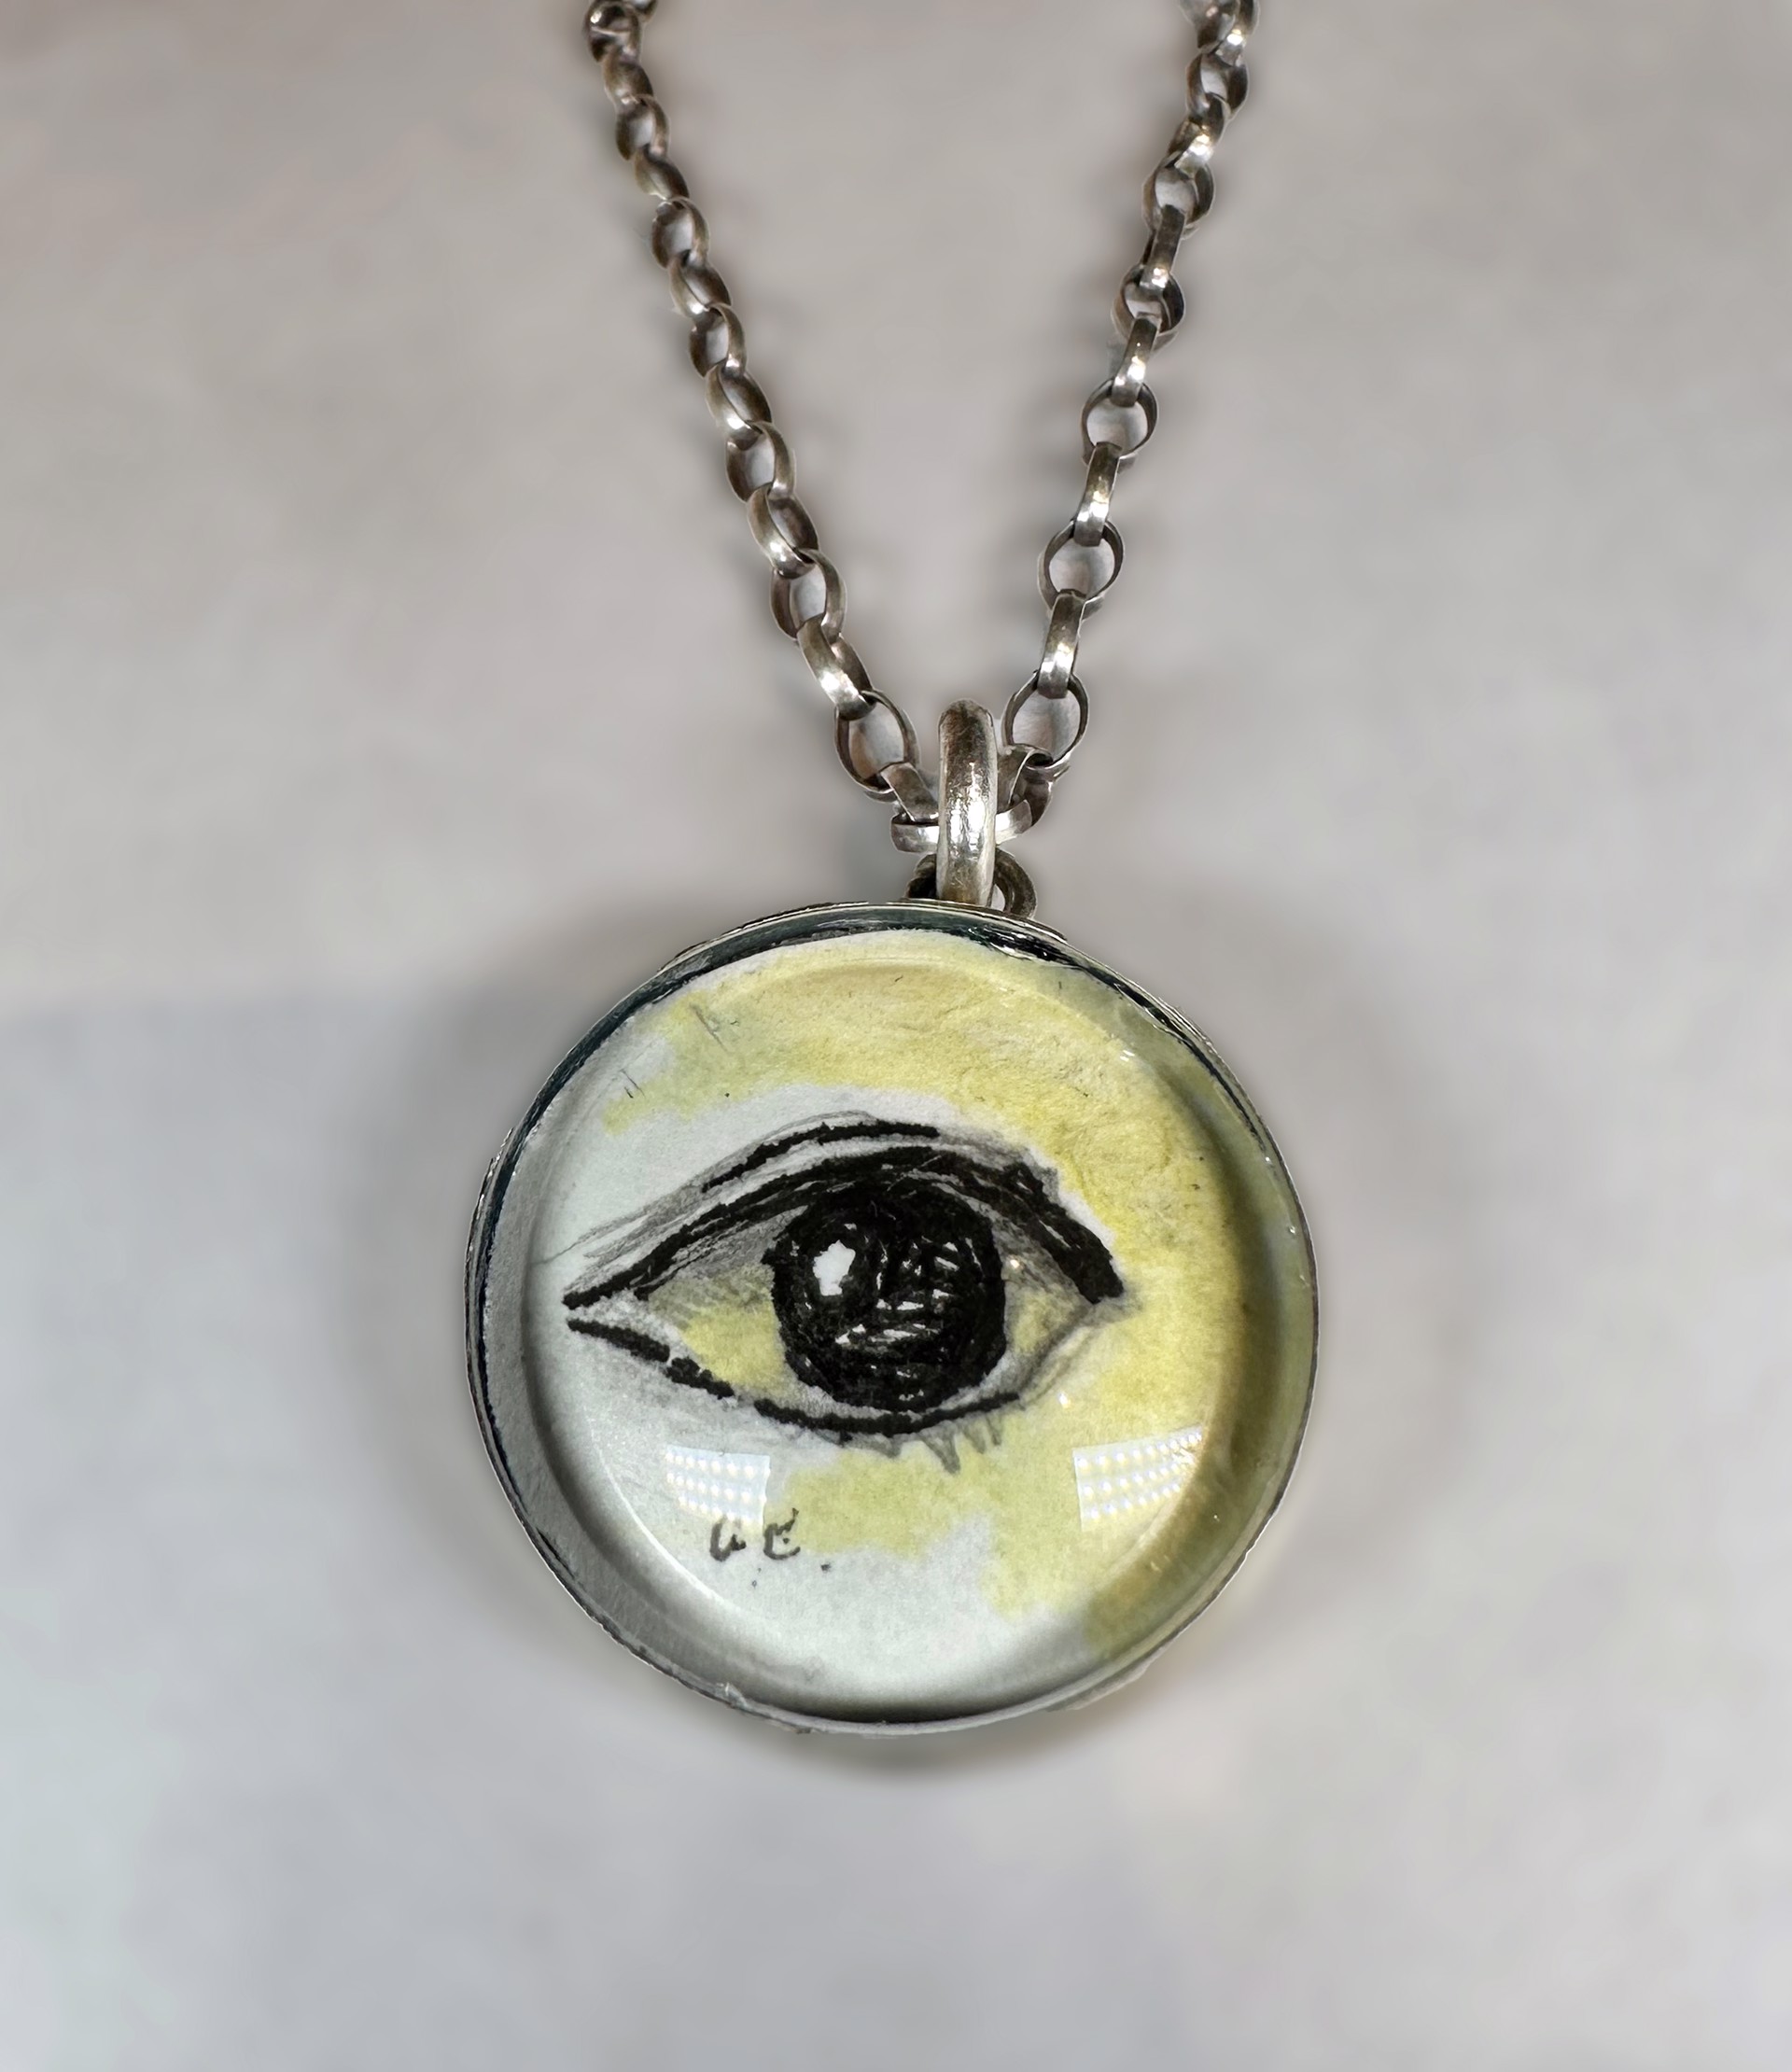 Sterling Silver Pendant with Eye Painting by Tabor Porter